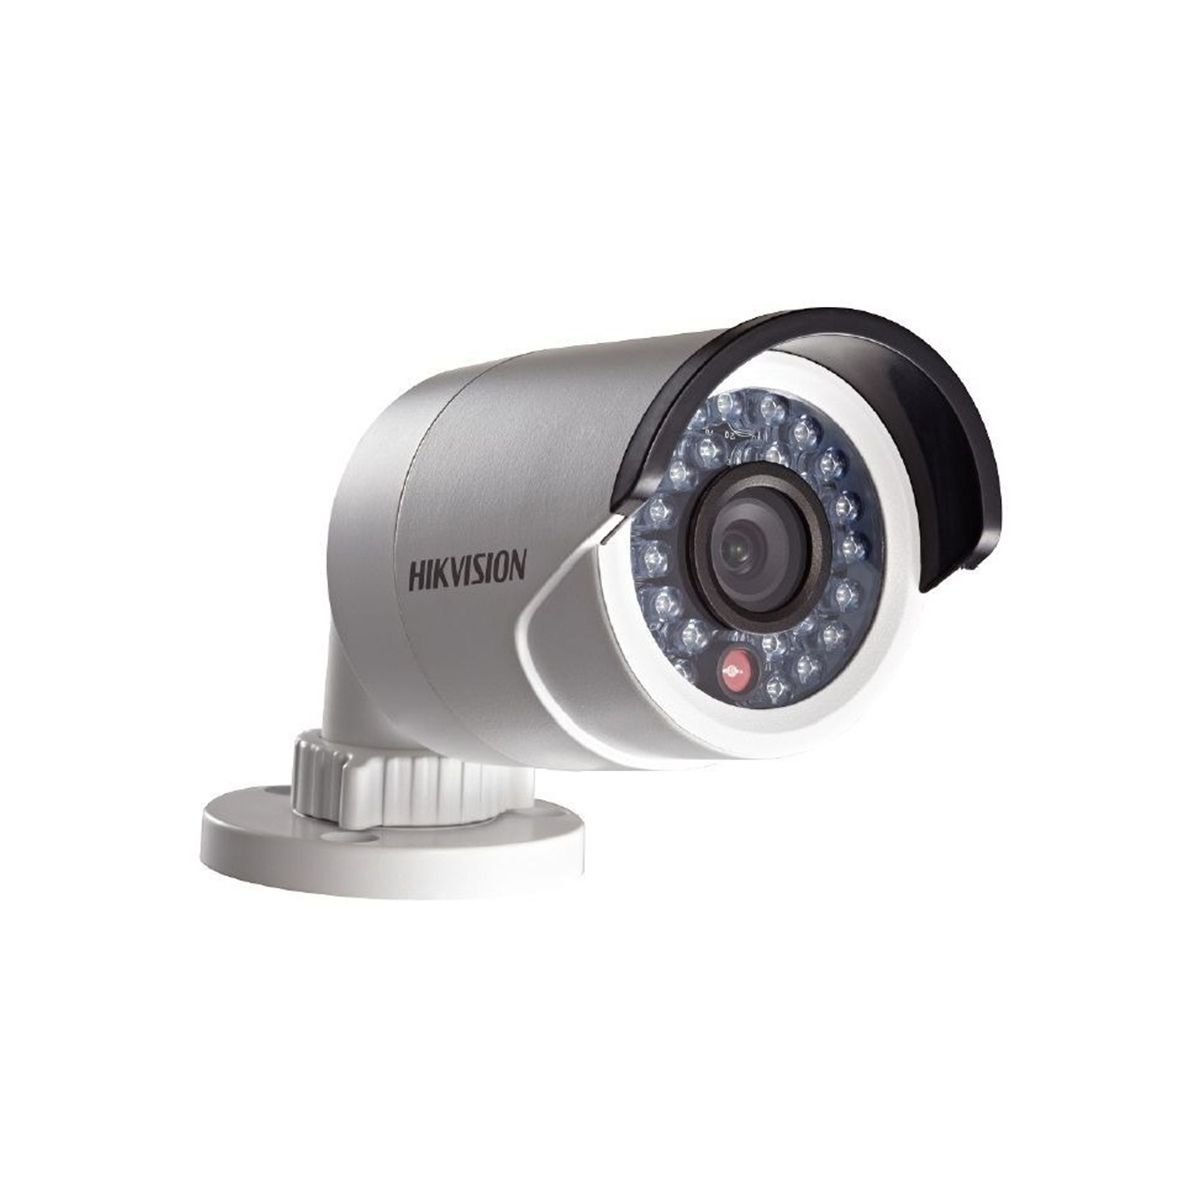 Cámaras IP WiFi Hikvision Tipo Bullet DS-2CD2010F-IW DS-2CD2010F-IW